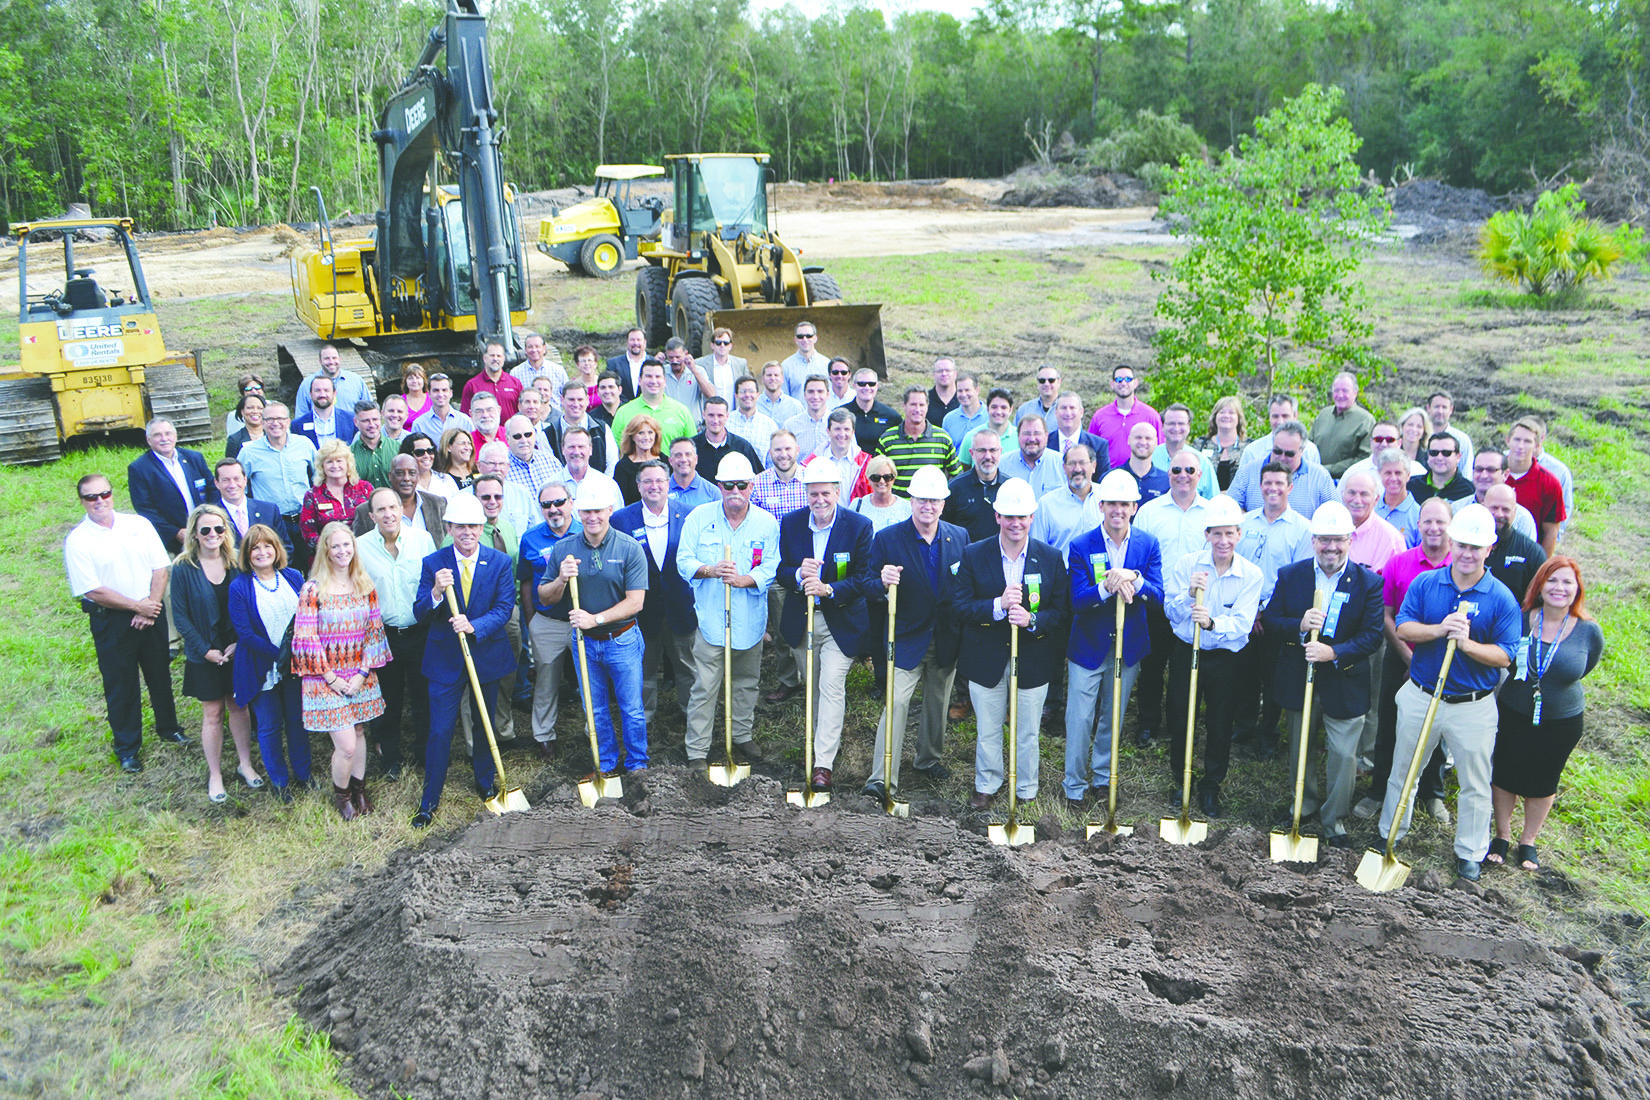 NEFBA officials, elected representatives and others pose for a group photo Oct. 18, 2017, at the groundbreaking ceremony for the new NEFBA building.